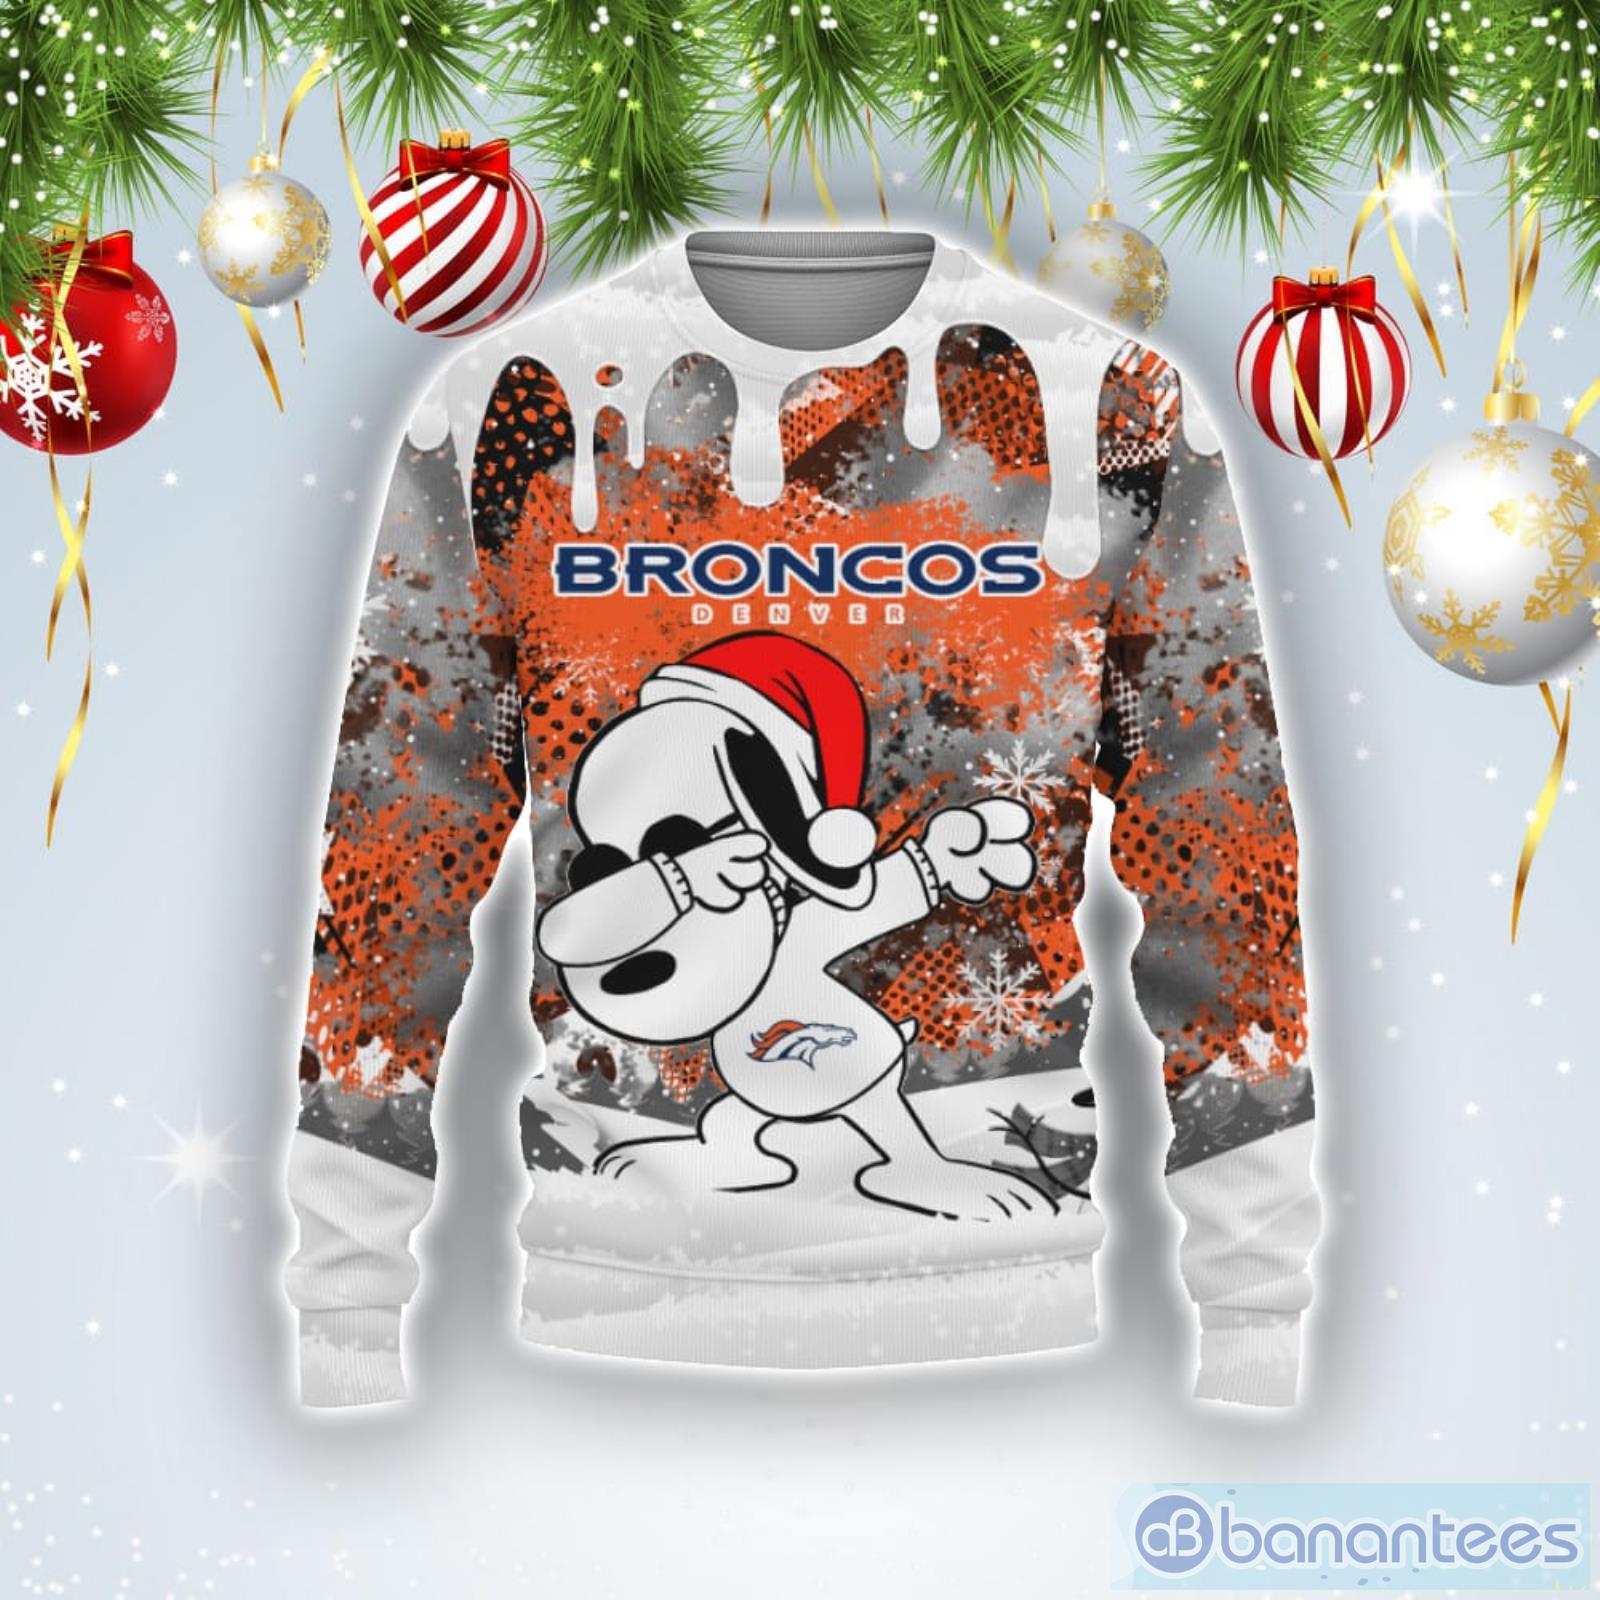 Denver Broncos Ugly Christmas Sweater For Fans - Banantees